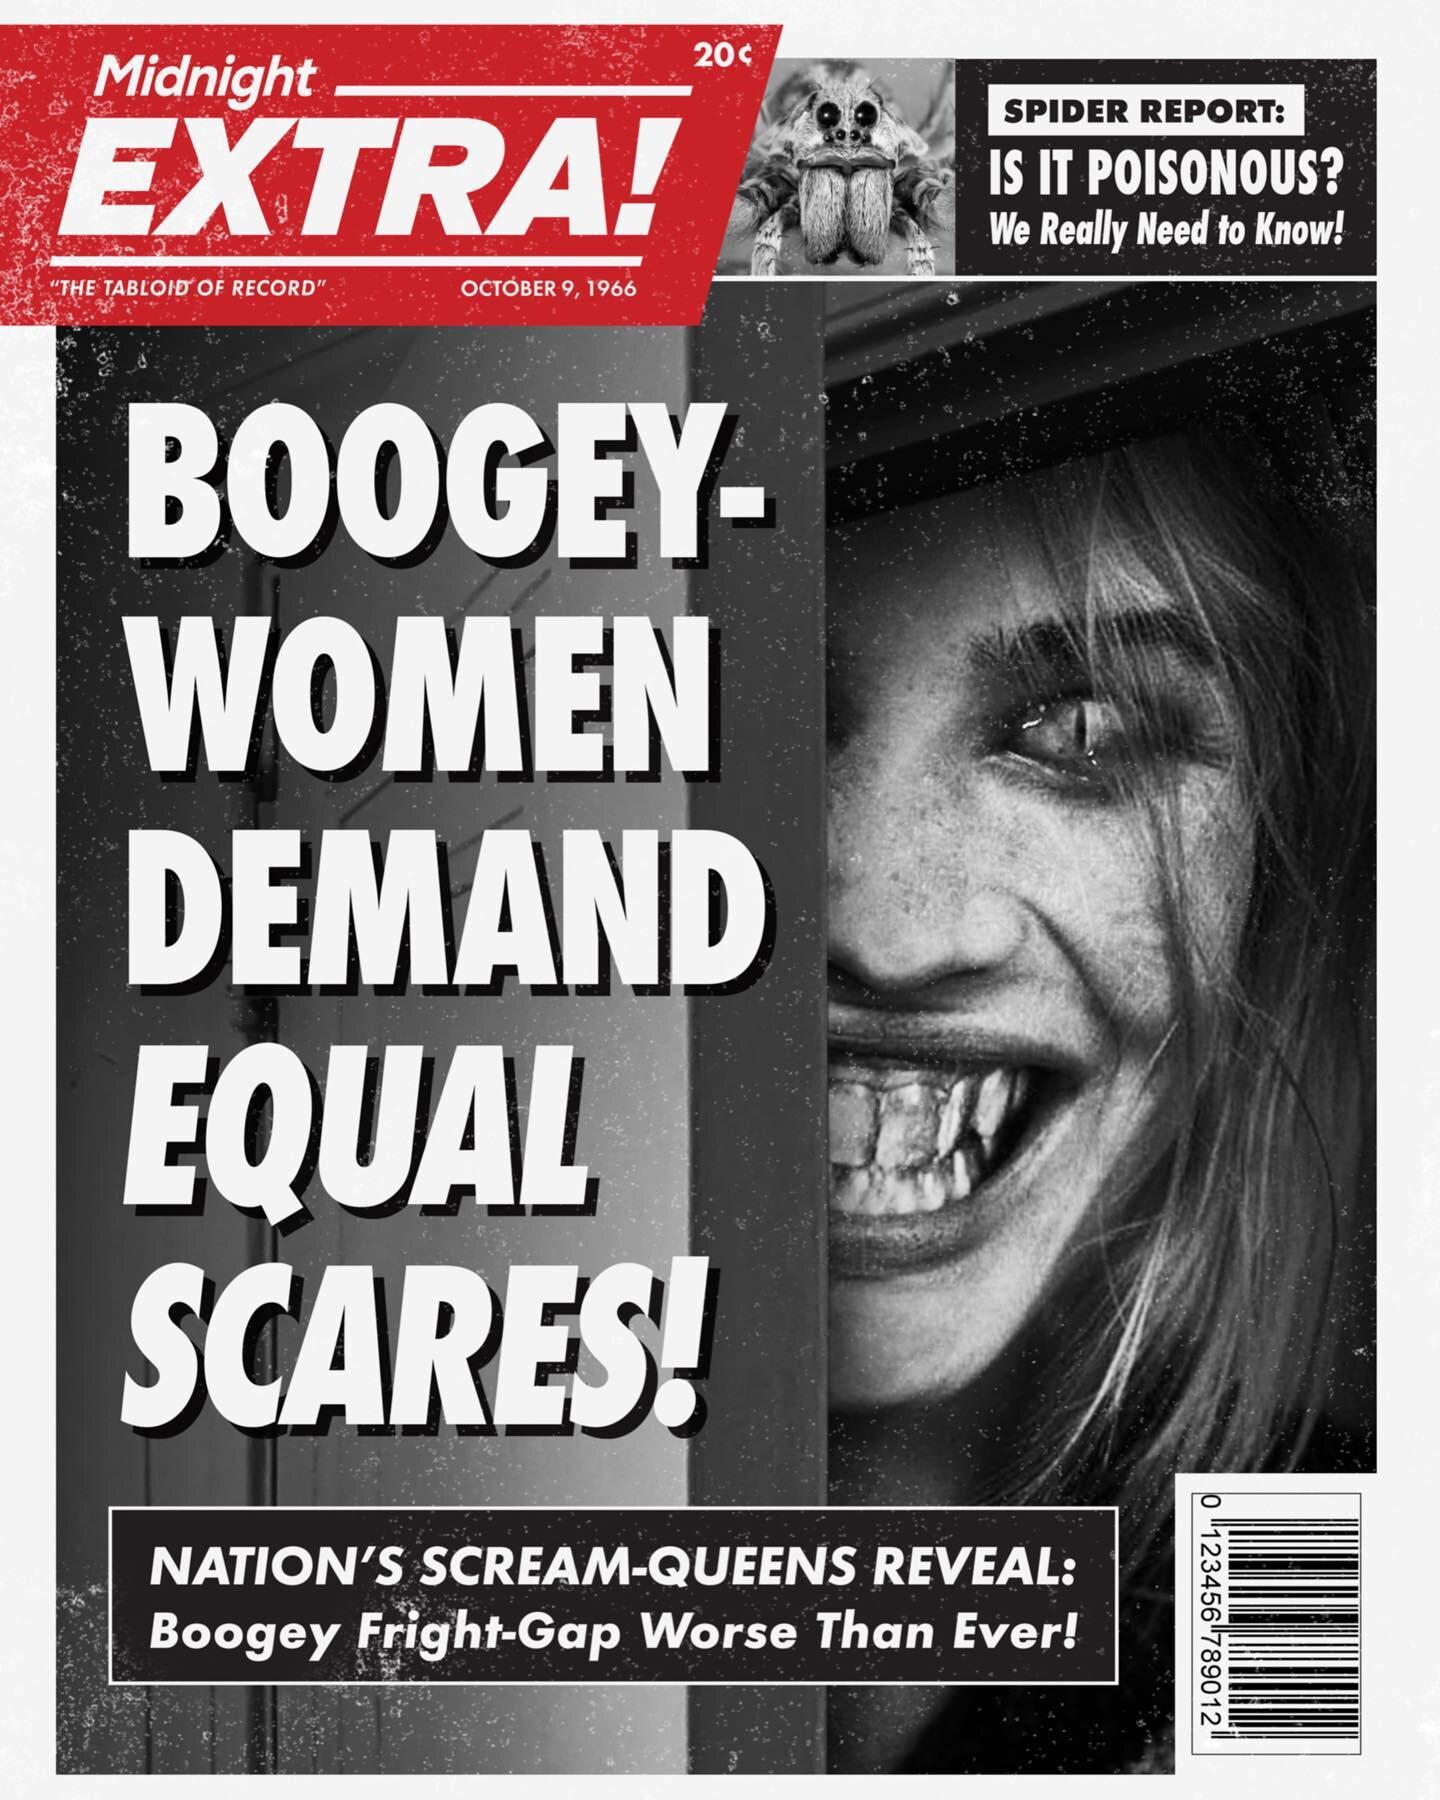 EXCLUSIVE REPORT from 1966! Fed up with growing SCARE-INEQUALITY, the nation&rsquo;s BOOGEY-WOMEN organize in the FIGHT FOR FAIR FRIGHTS! Standing on the shoulders of the brave SPOOKY-SUFFRAGETTES, the boogey-women make their SCREAMS HEARD!
-
-
-
-
#